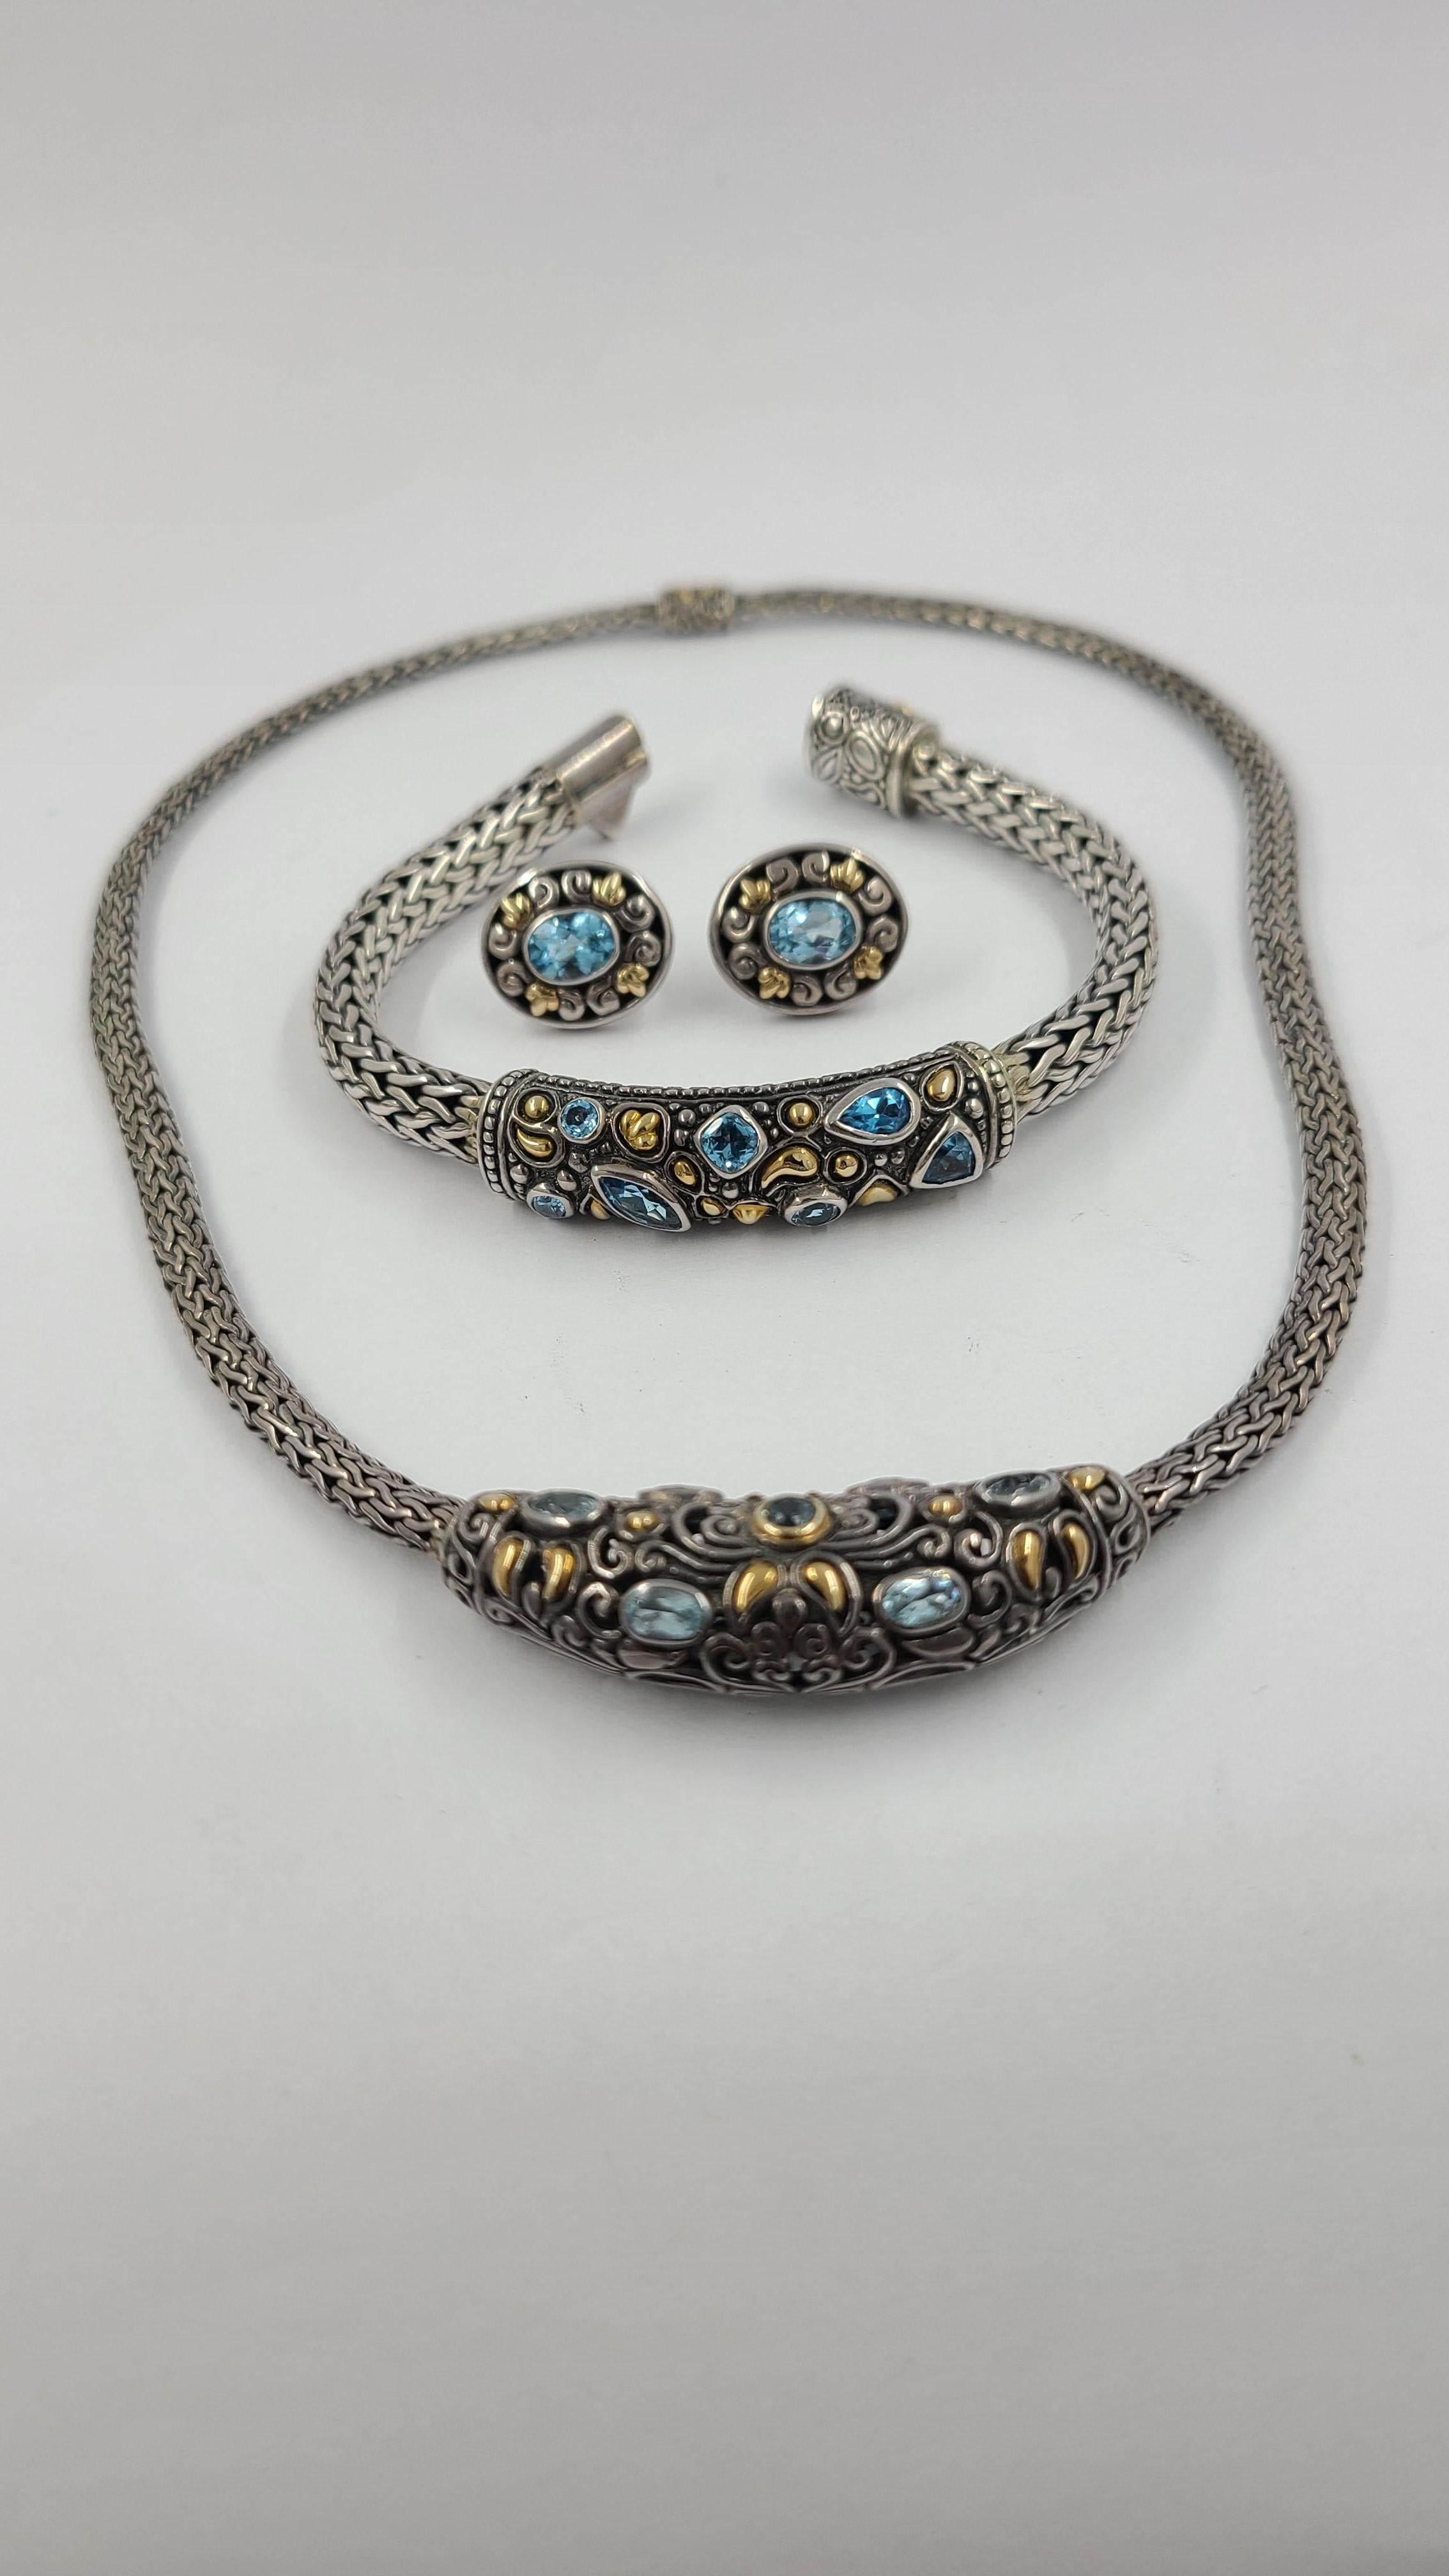 Matched Set of Necklace, Bracelet, & Earrings Crafted in Sterling Silver with 18 Karat Yellow Gold Accents. The Balinese style weave design features a variety of faceted blue topaz shapes bezel set in the front of each piece. The necklace measures